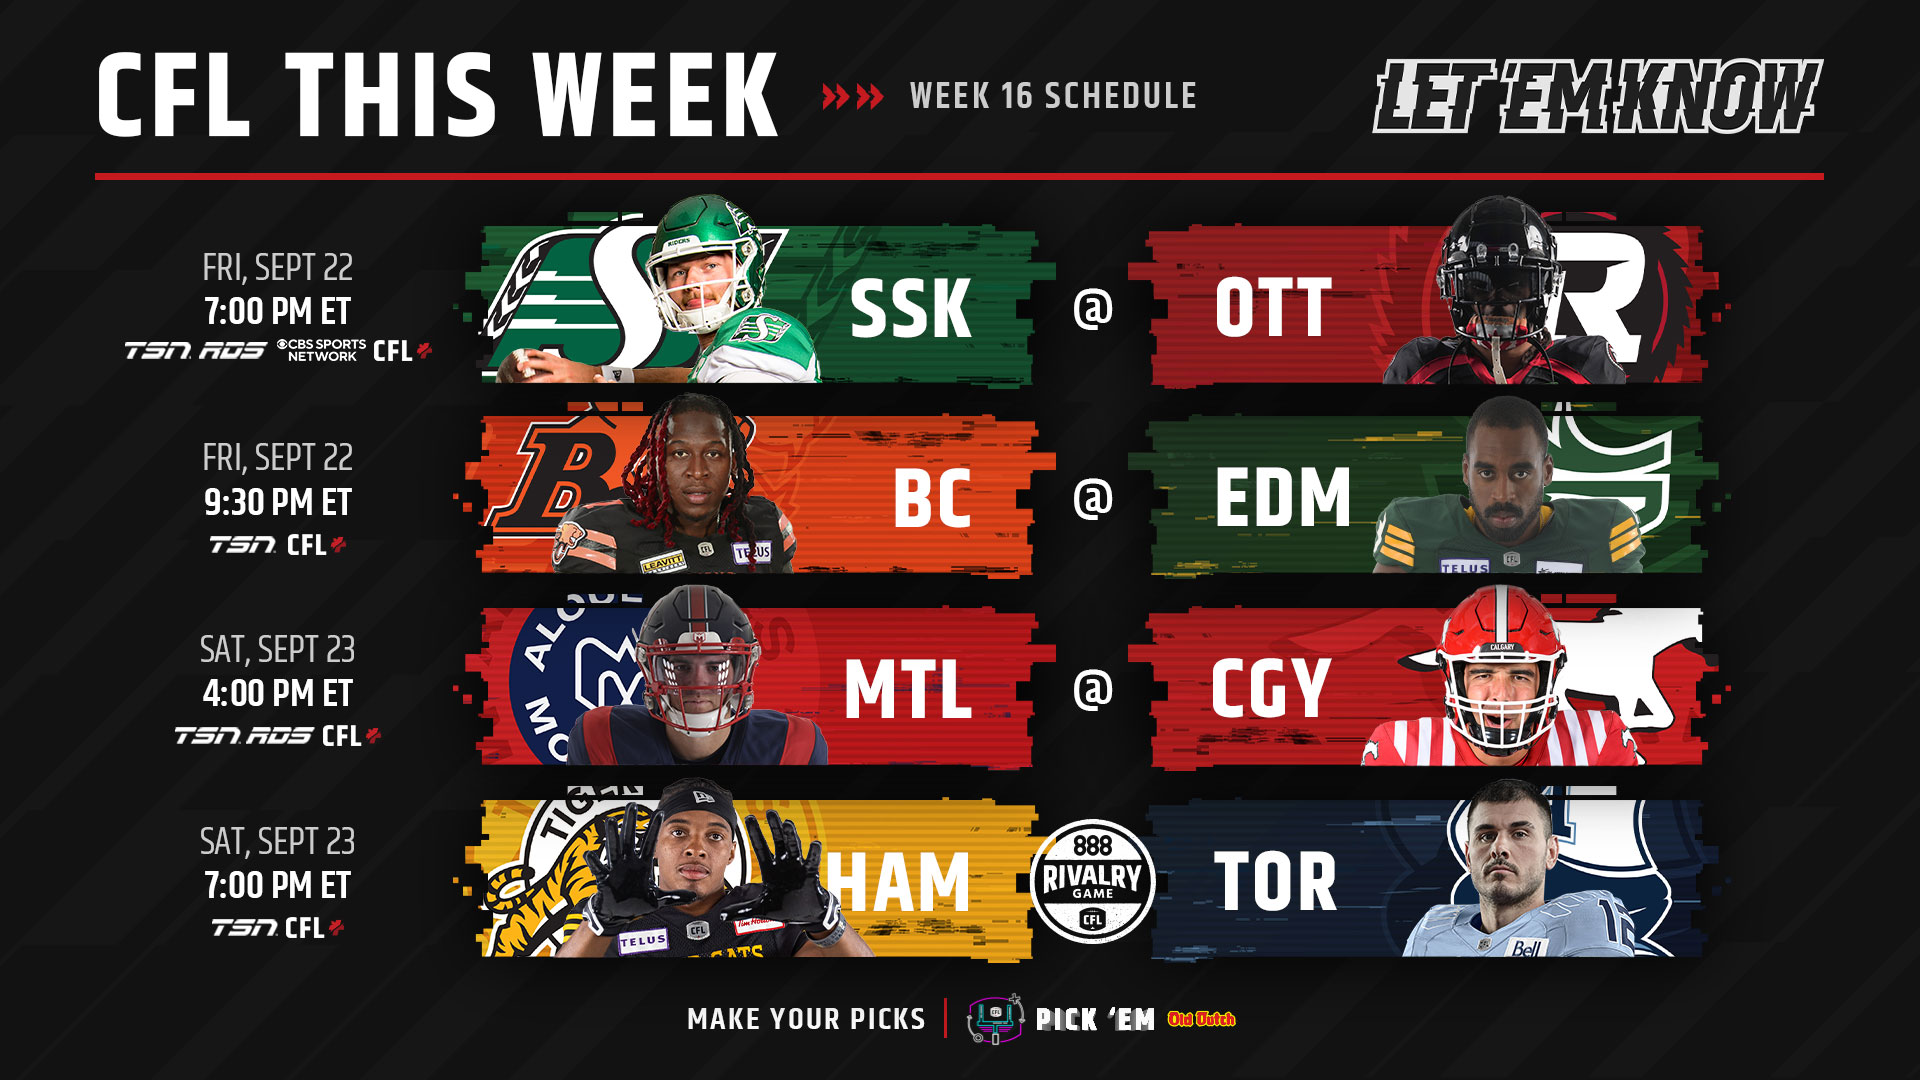 CFL Schedule Montreal Alouettes vs Calgary Stampeders, Hamilton Tiger-Cats vs Toronto Argonauts, Odds, CFL Live Stream Free, CFL Games Today (Saturday, September 23)